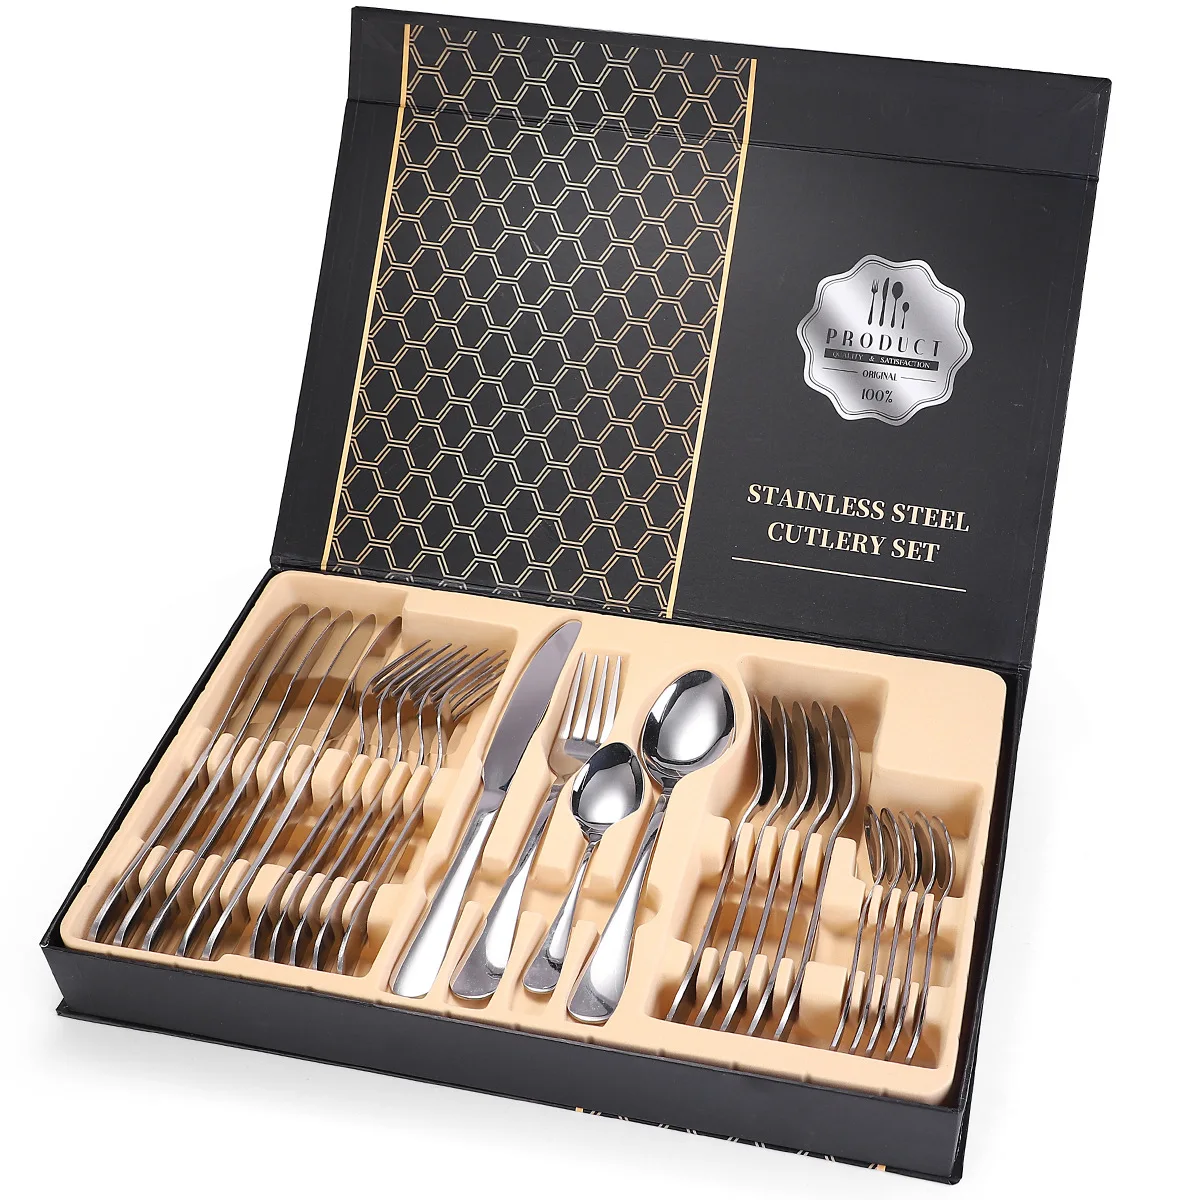 

Wholesales Mirror Polish Rose Gold Cutlery Spoon And Fork Set Stainless Steel silverware 24pcs Flatware set, Silver, gold,rose gold,rainbow,black